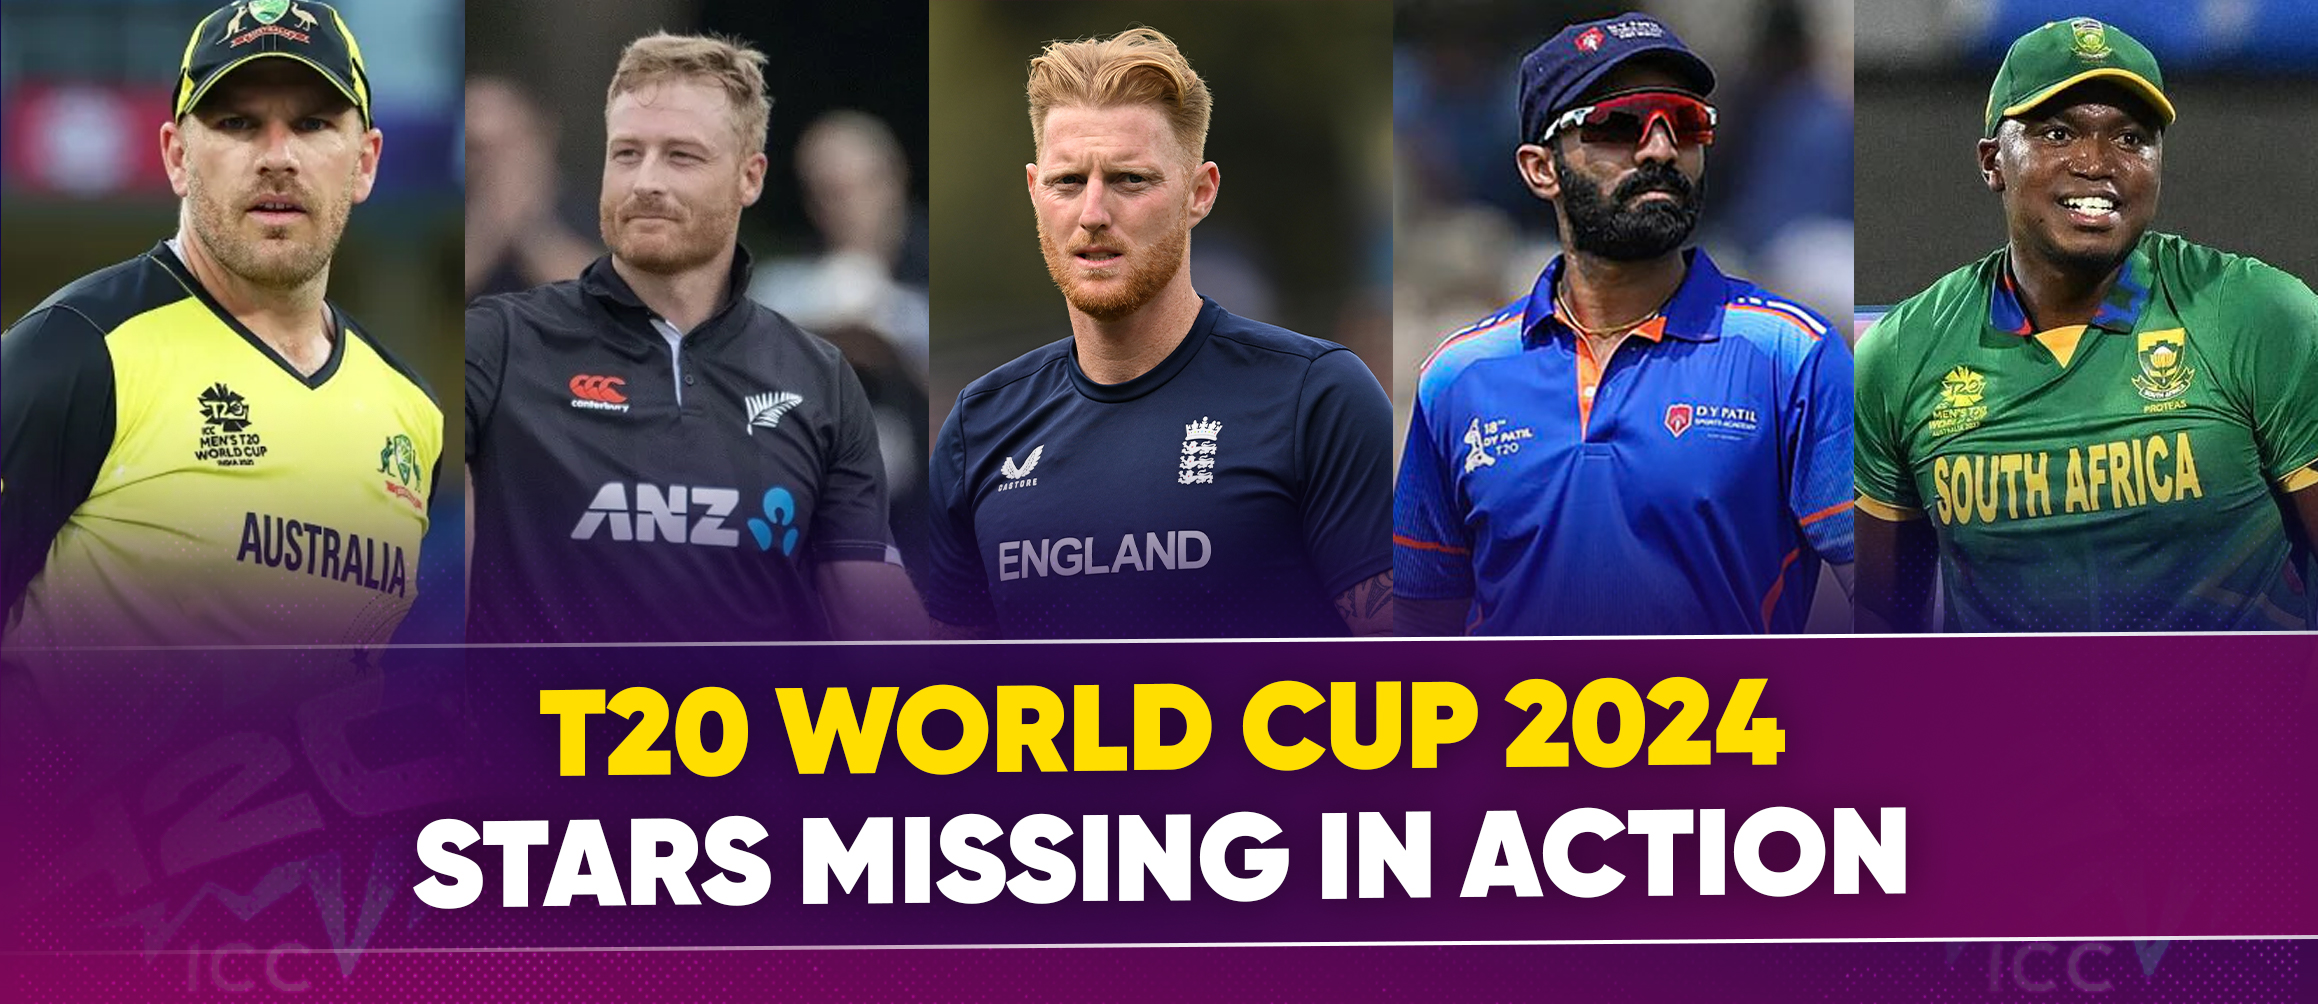 T20 World Cup 2024: Stars Missing in Action